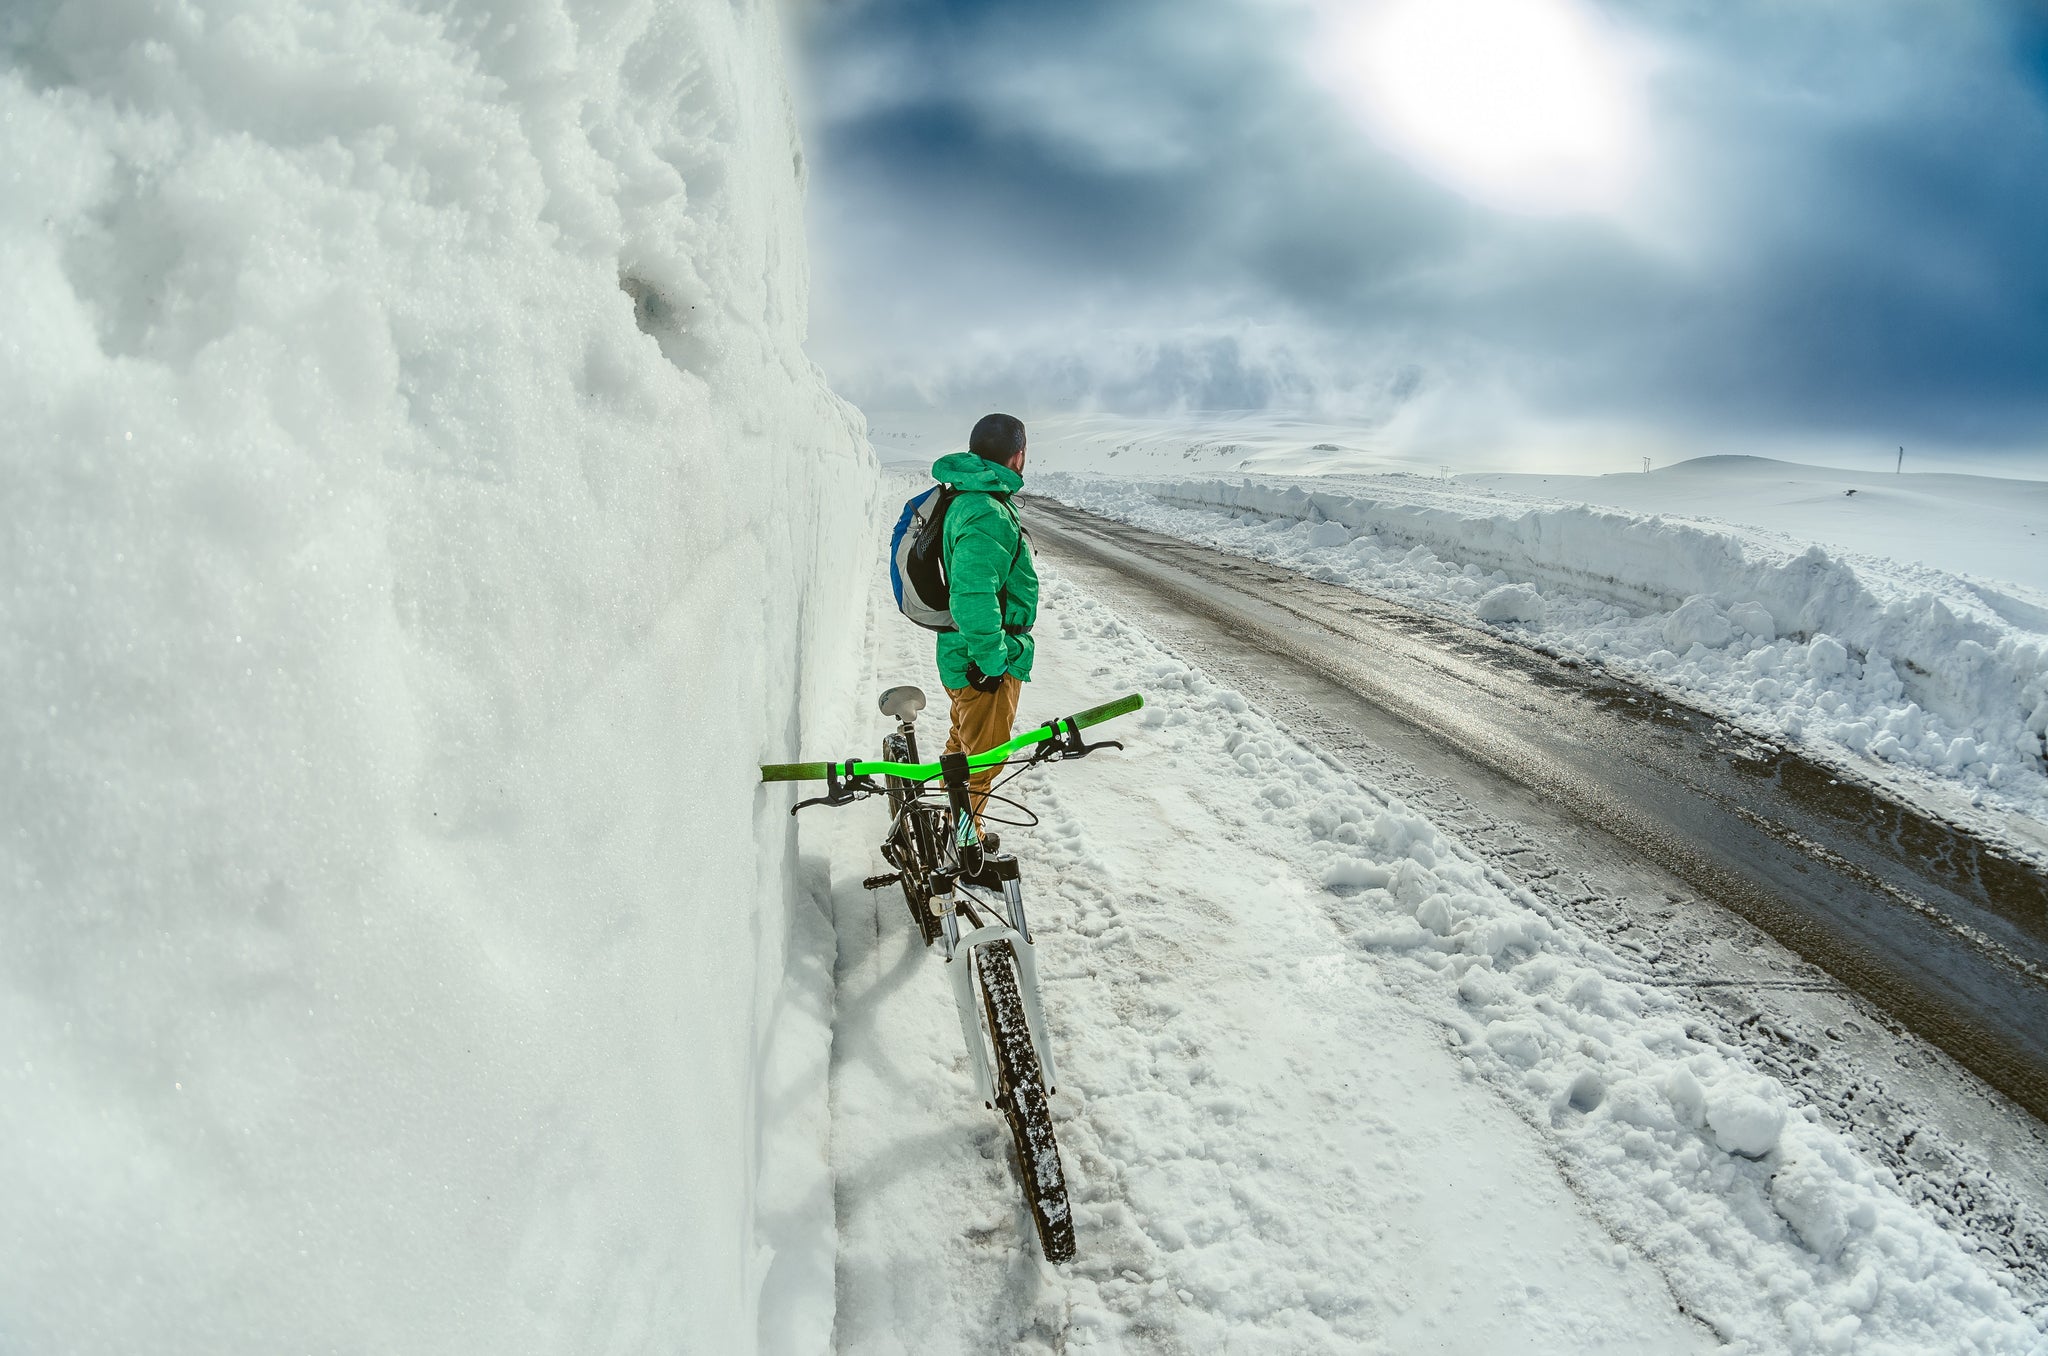 Winter cycling: 15 essential tips to keep you safe & motivated